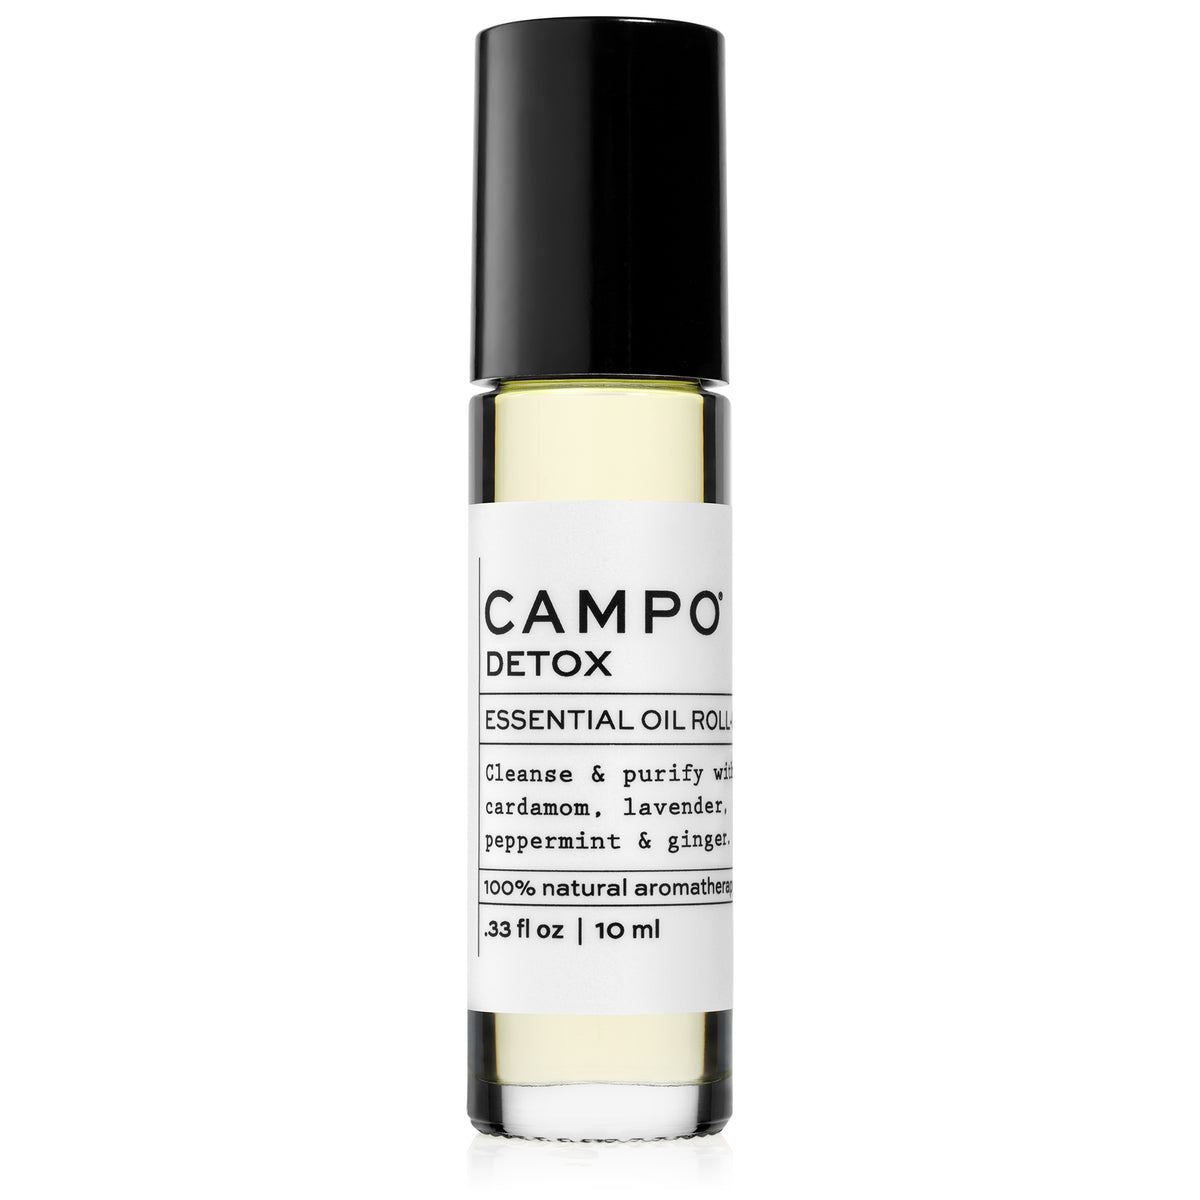 CAMPO Beauty 10 ml DETOX Blend Essential Oil Roll-On. Cleanse &amp; purify your body naturally. Help eliminate toxins naturally with this 100% natural essential oil roll-on blend of Cardamom, Lavender, Peppermint &amp; Ginger. Pre-blended with 100% natural beauty carrier oils. Jet set and ready to roll.